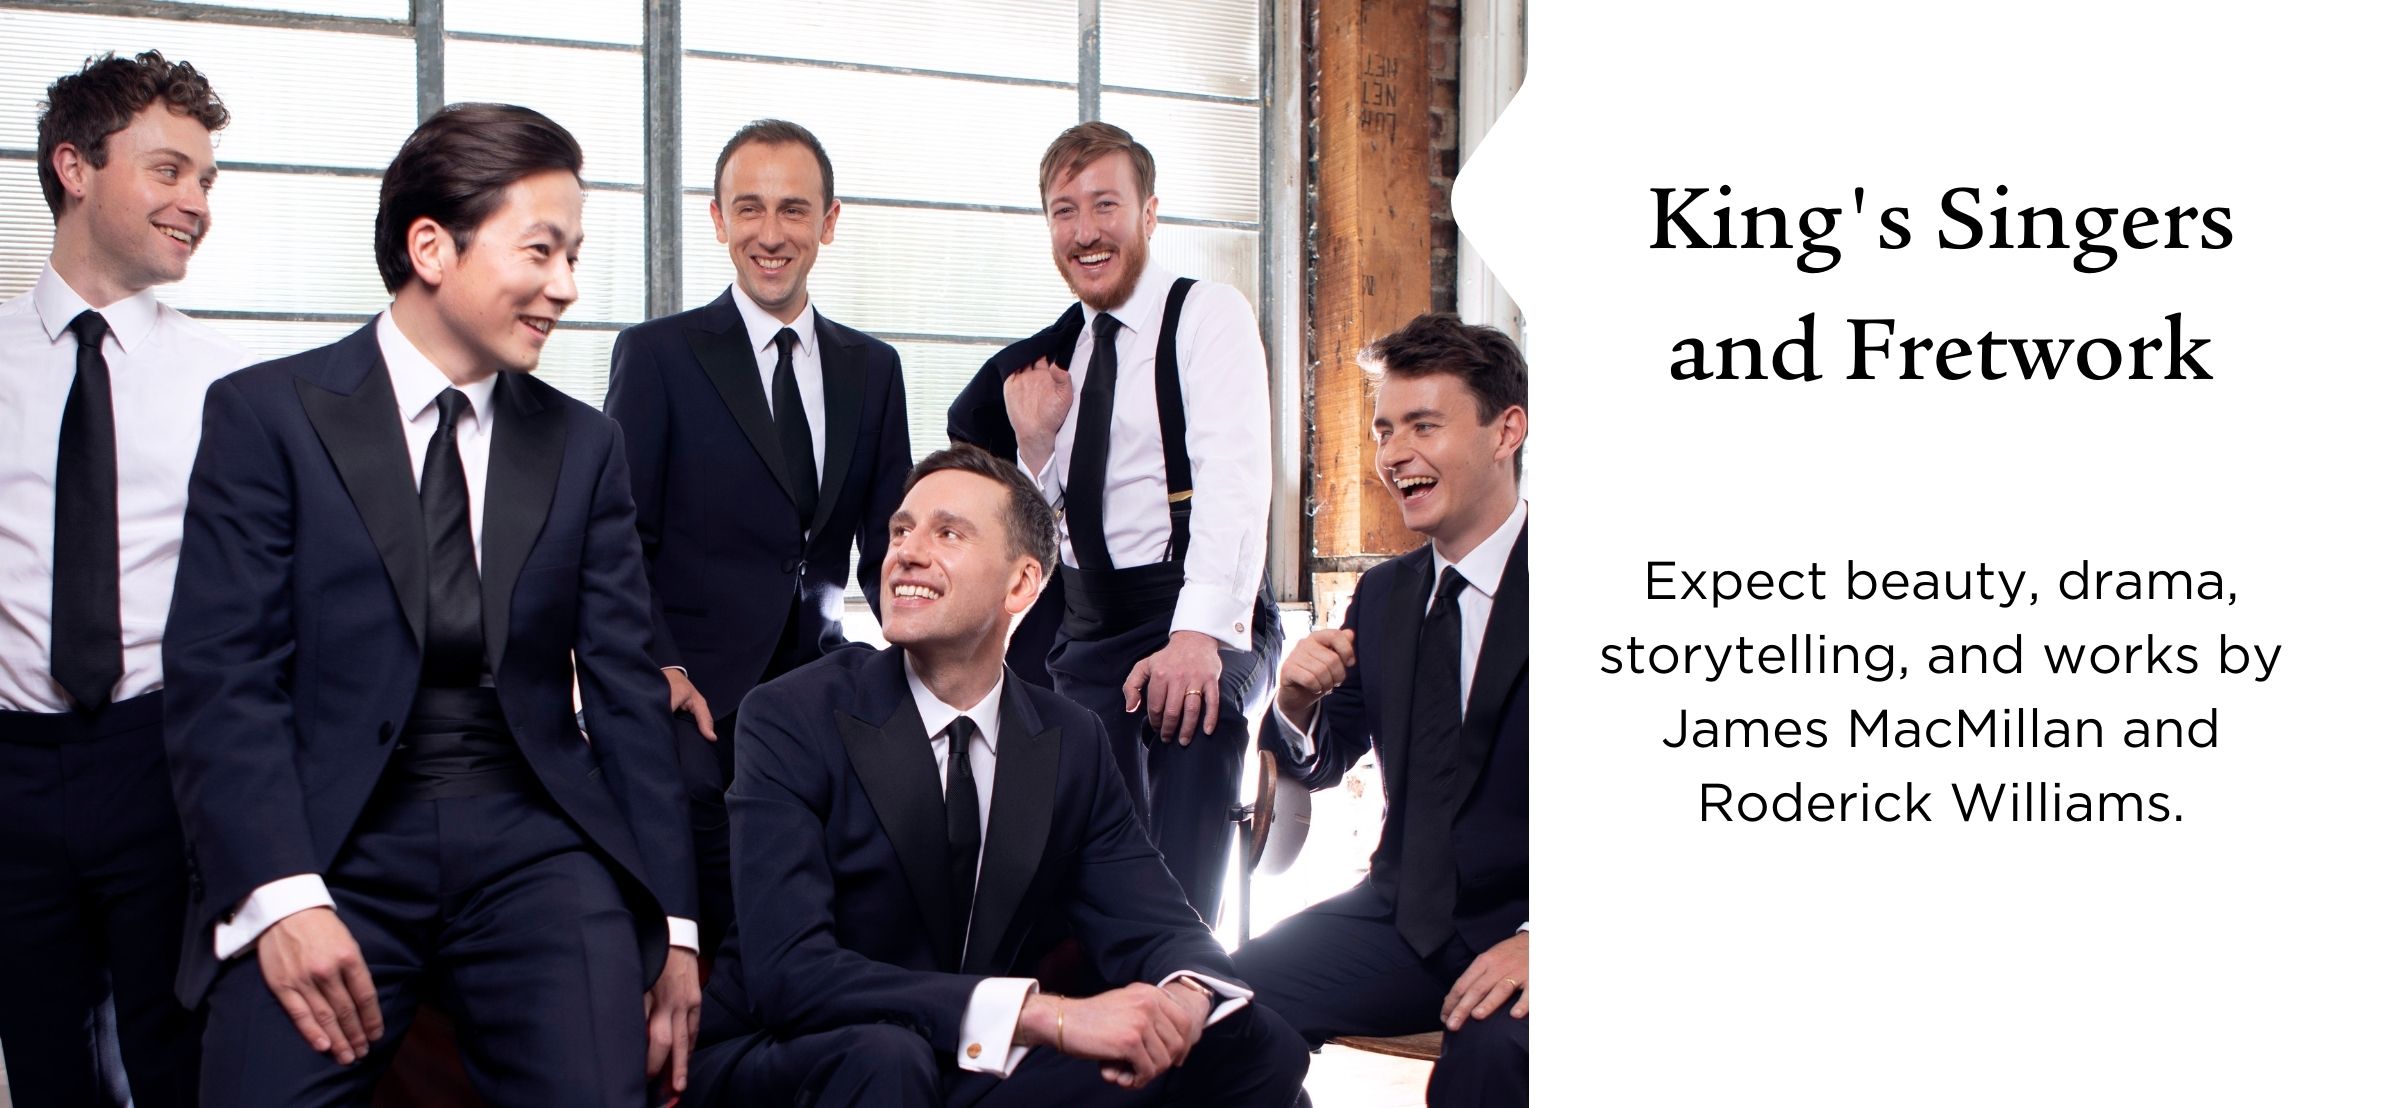 The King’s Singers Fretwork